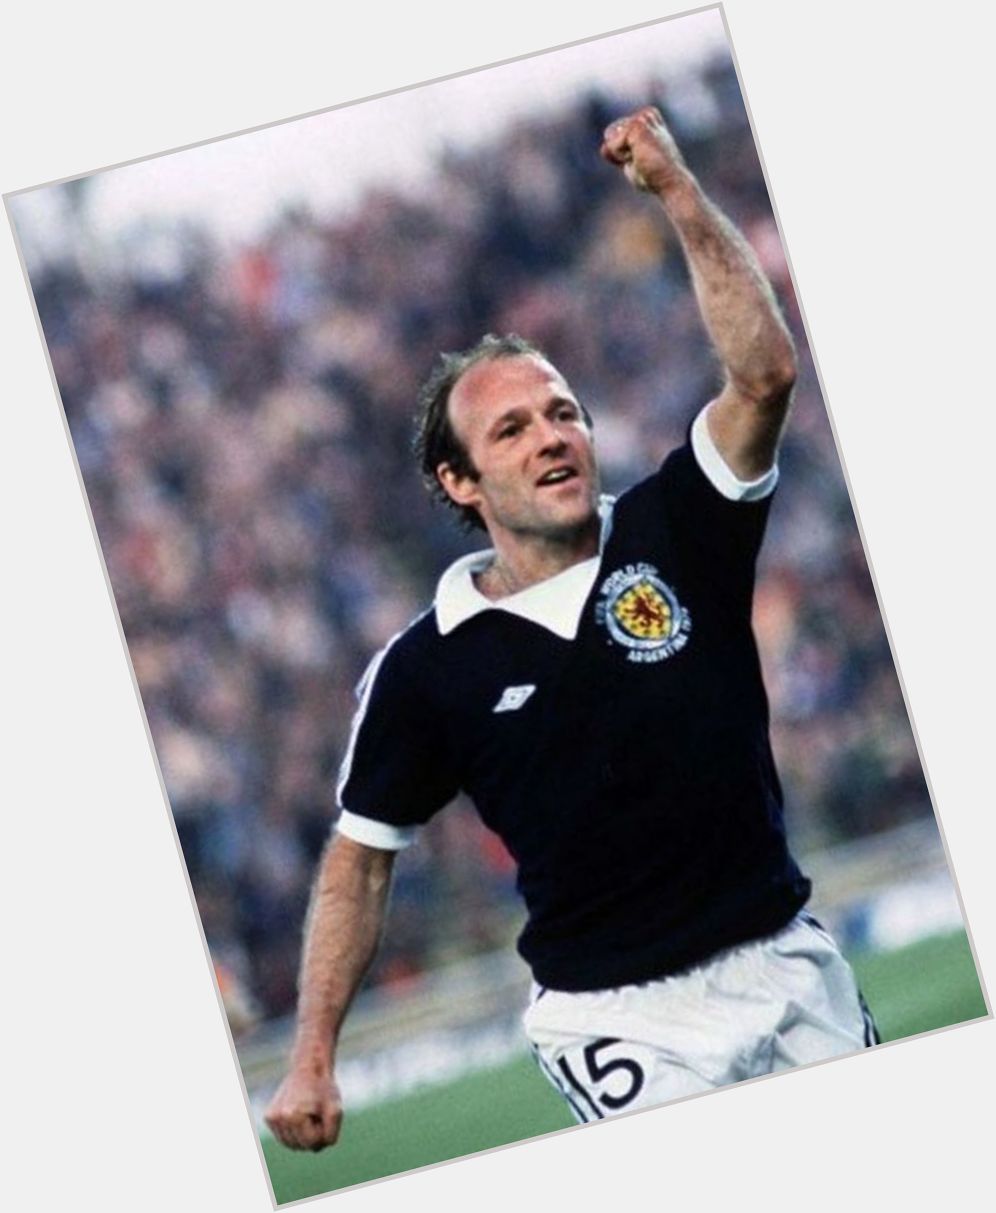 Http://fanpagepress.net/m/A/Archie Gemmill New Pic 1